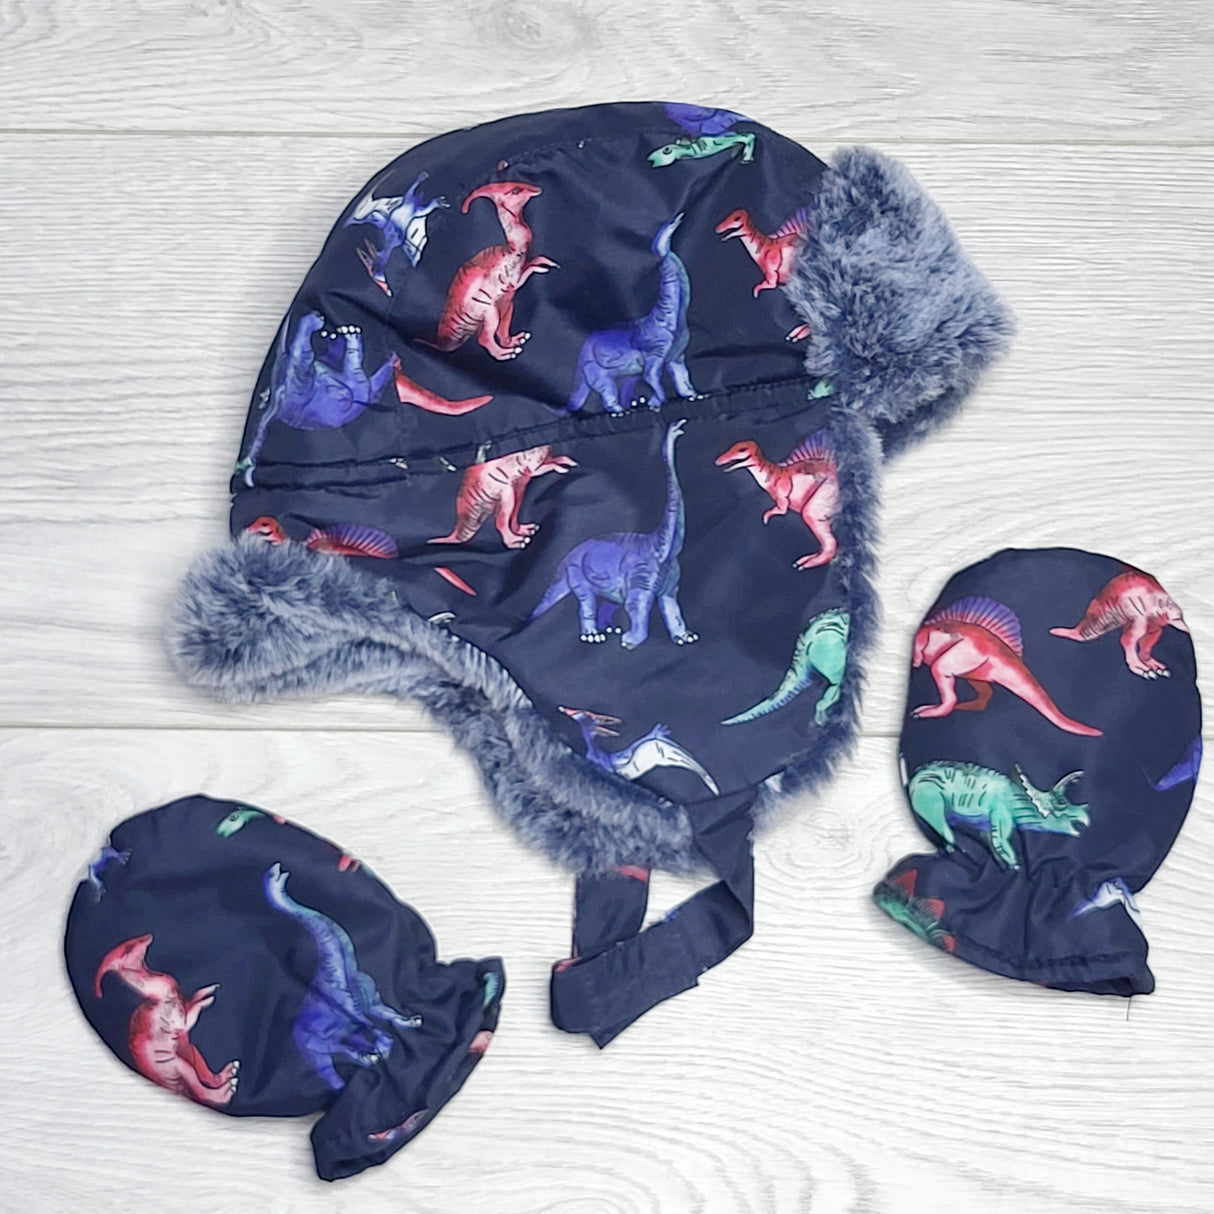 HWIL1 - Joe navy dinosaur trapper hat and mittens. size 0-12 months